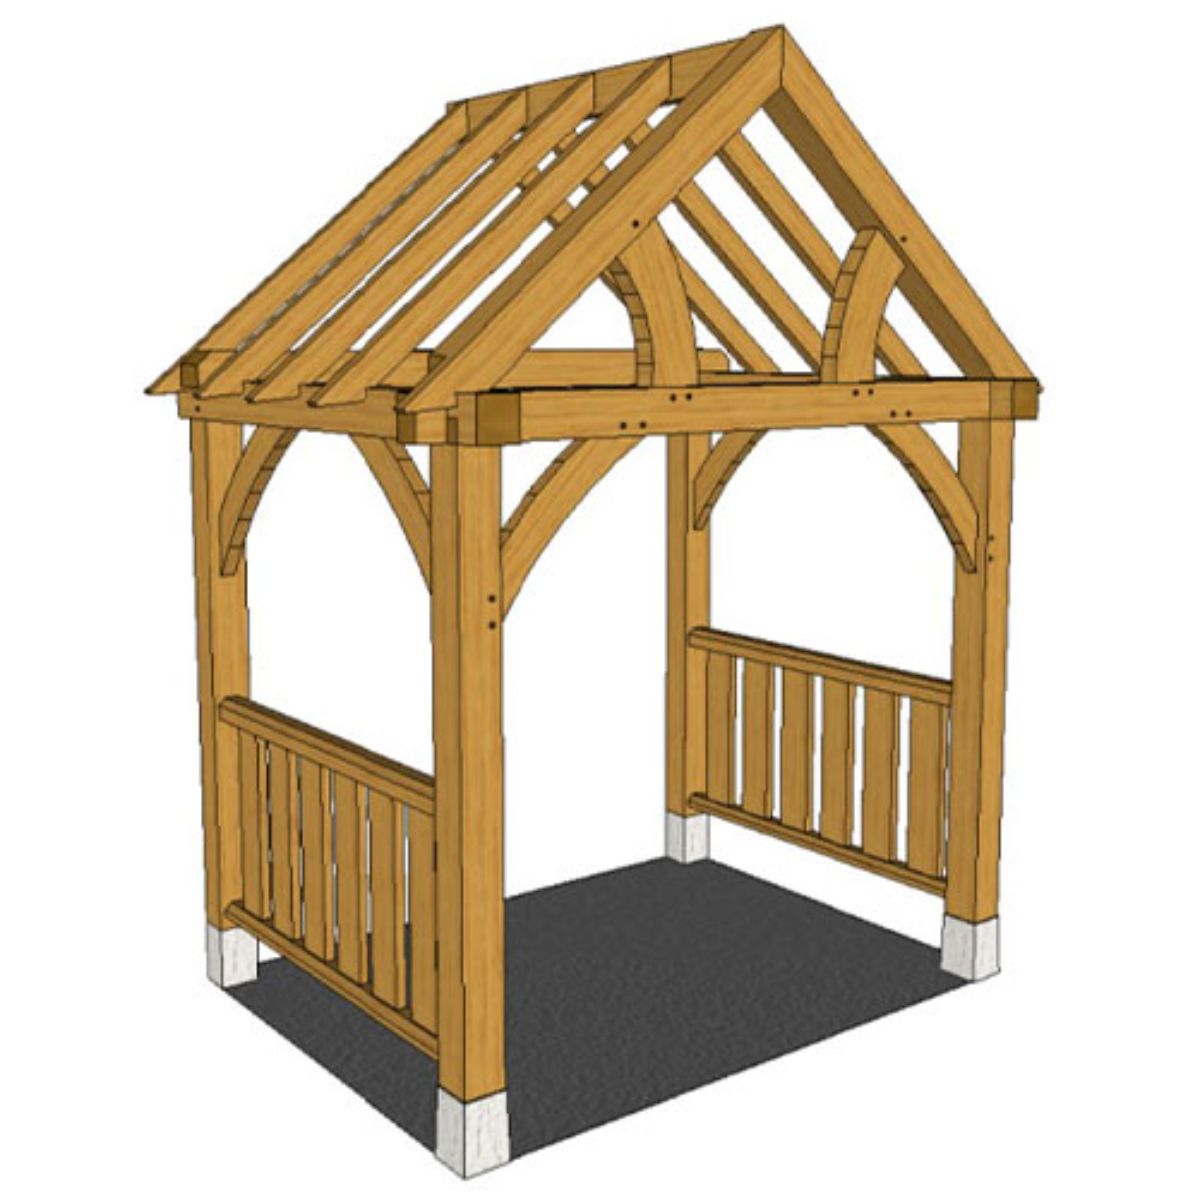 Porch Builder - Full Height With Balustrade